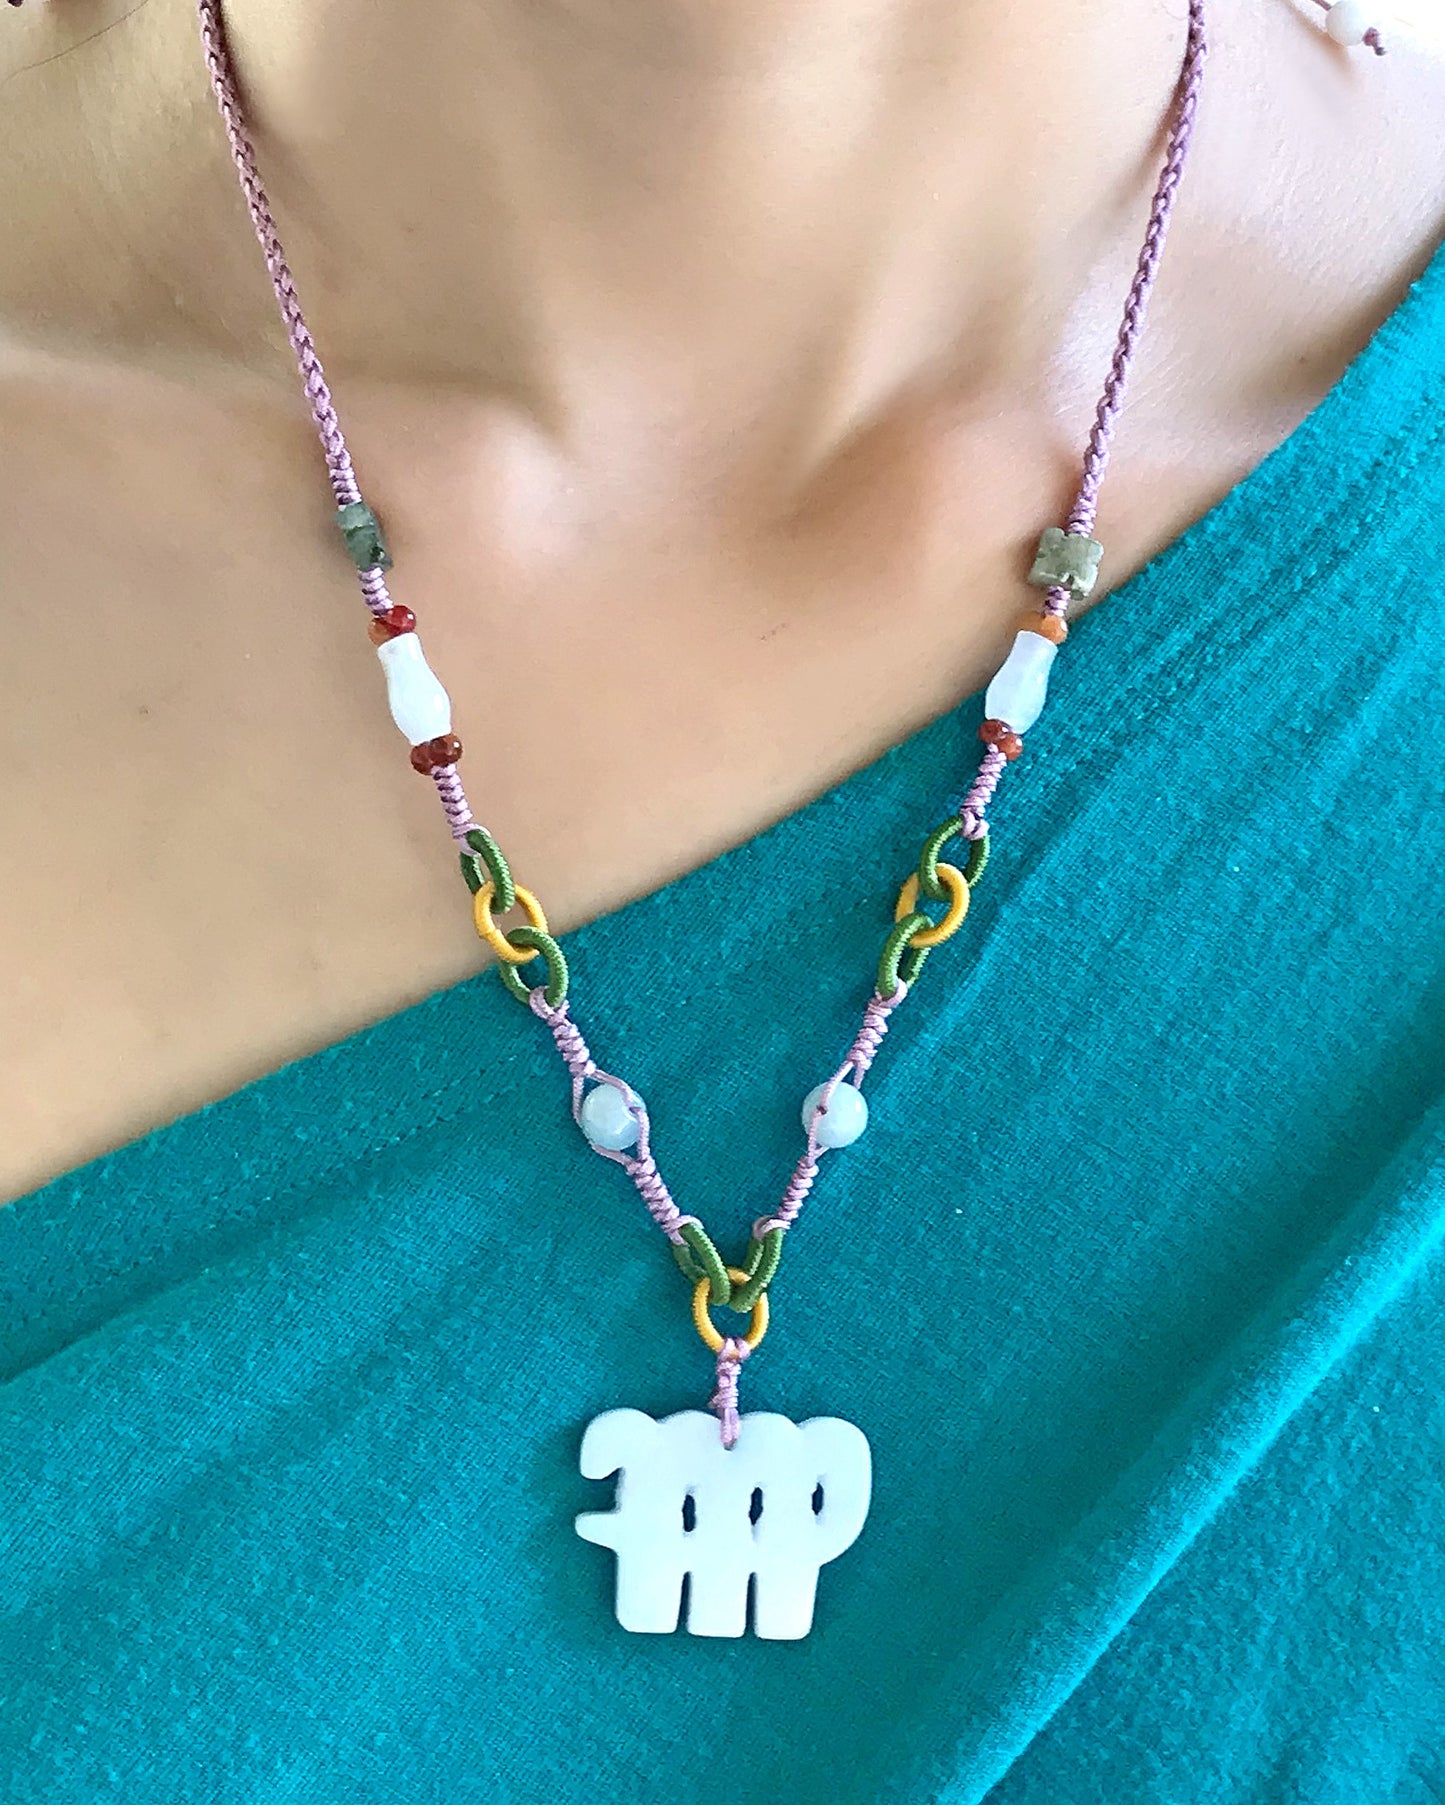 Celebrate Your Virgo Balance Nature with a Handcrafted Jade Necklace made with Lavender Cord